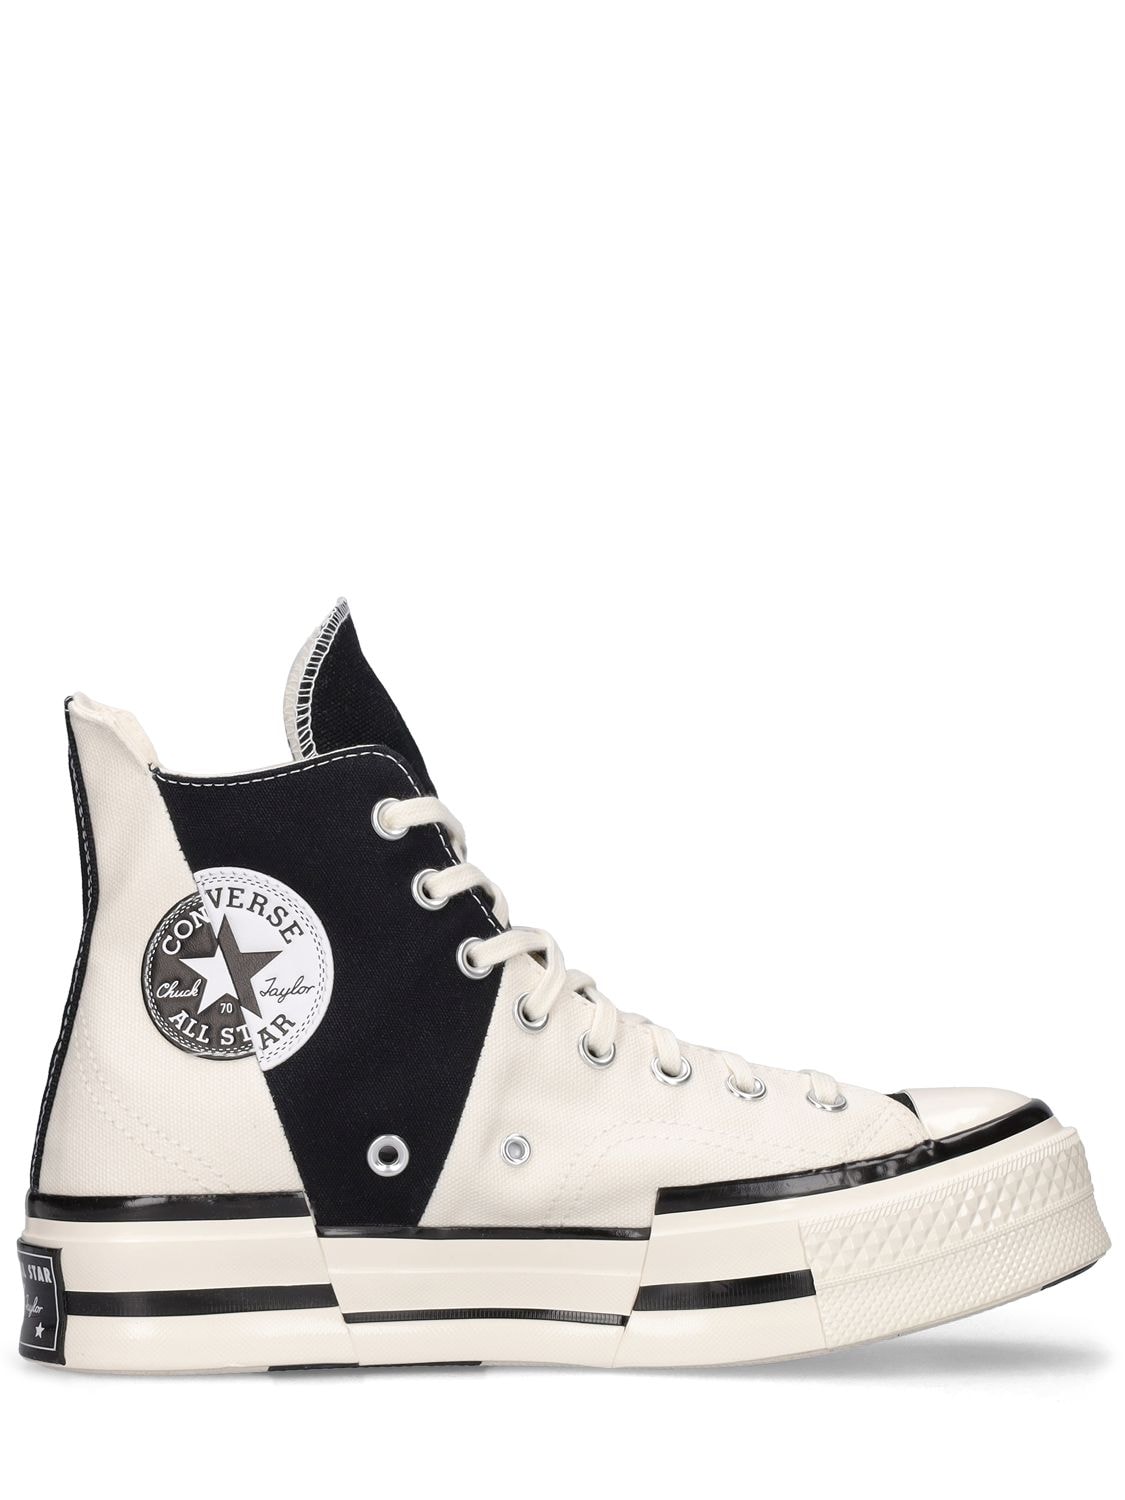 CONVERSE Chuck 70 Plus Counter Climate Sneakers